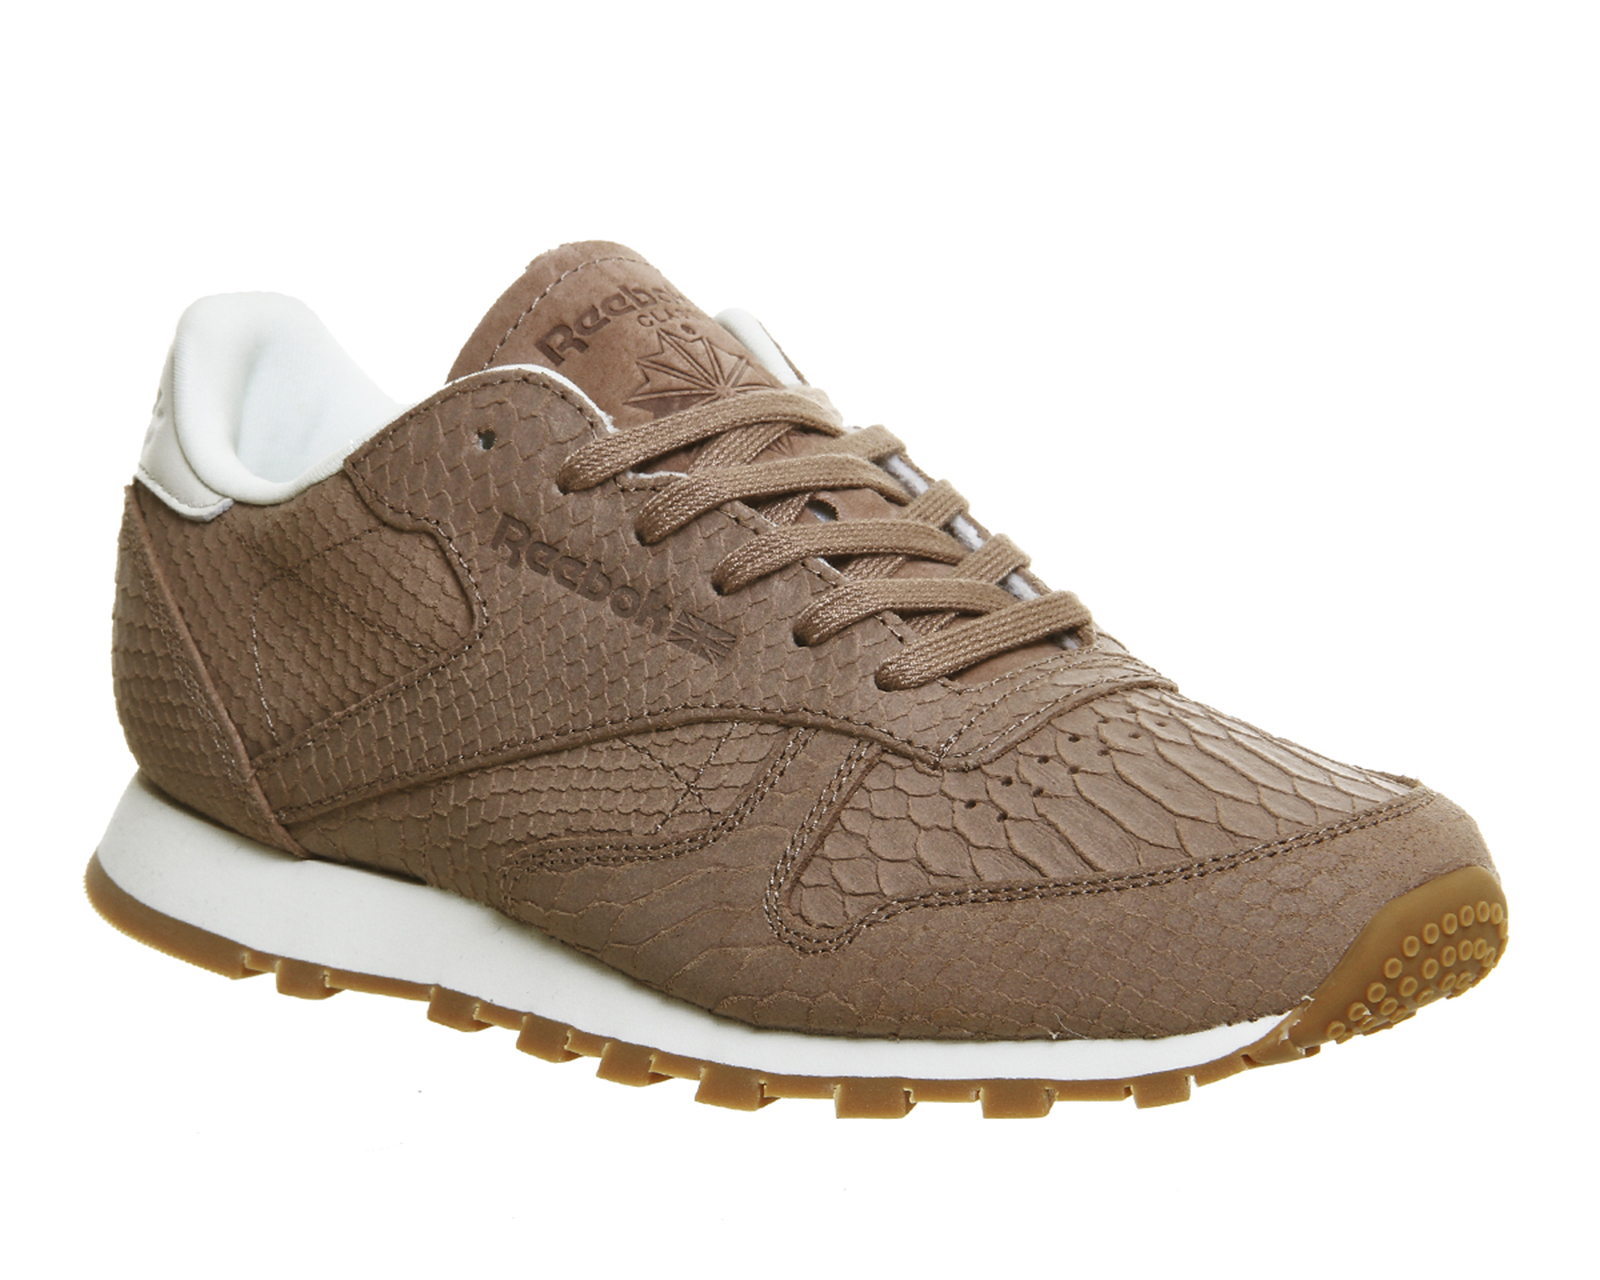 ReebokCl Leather CleanTaupe Chalk Extoics